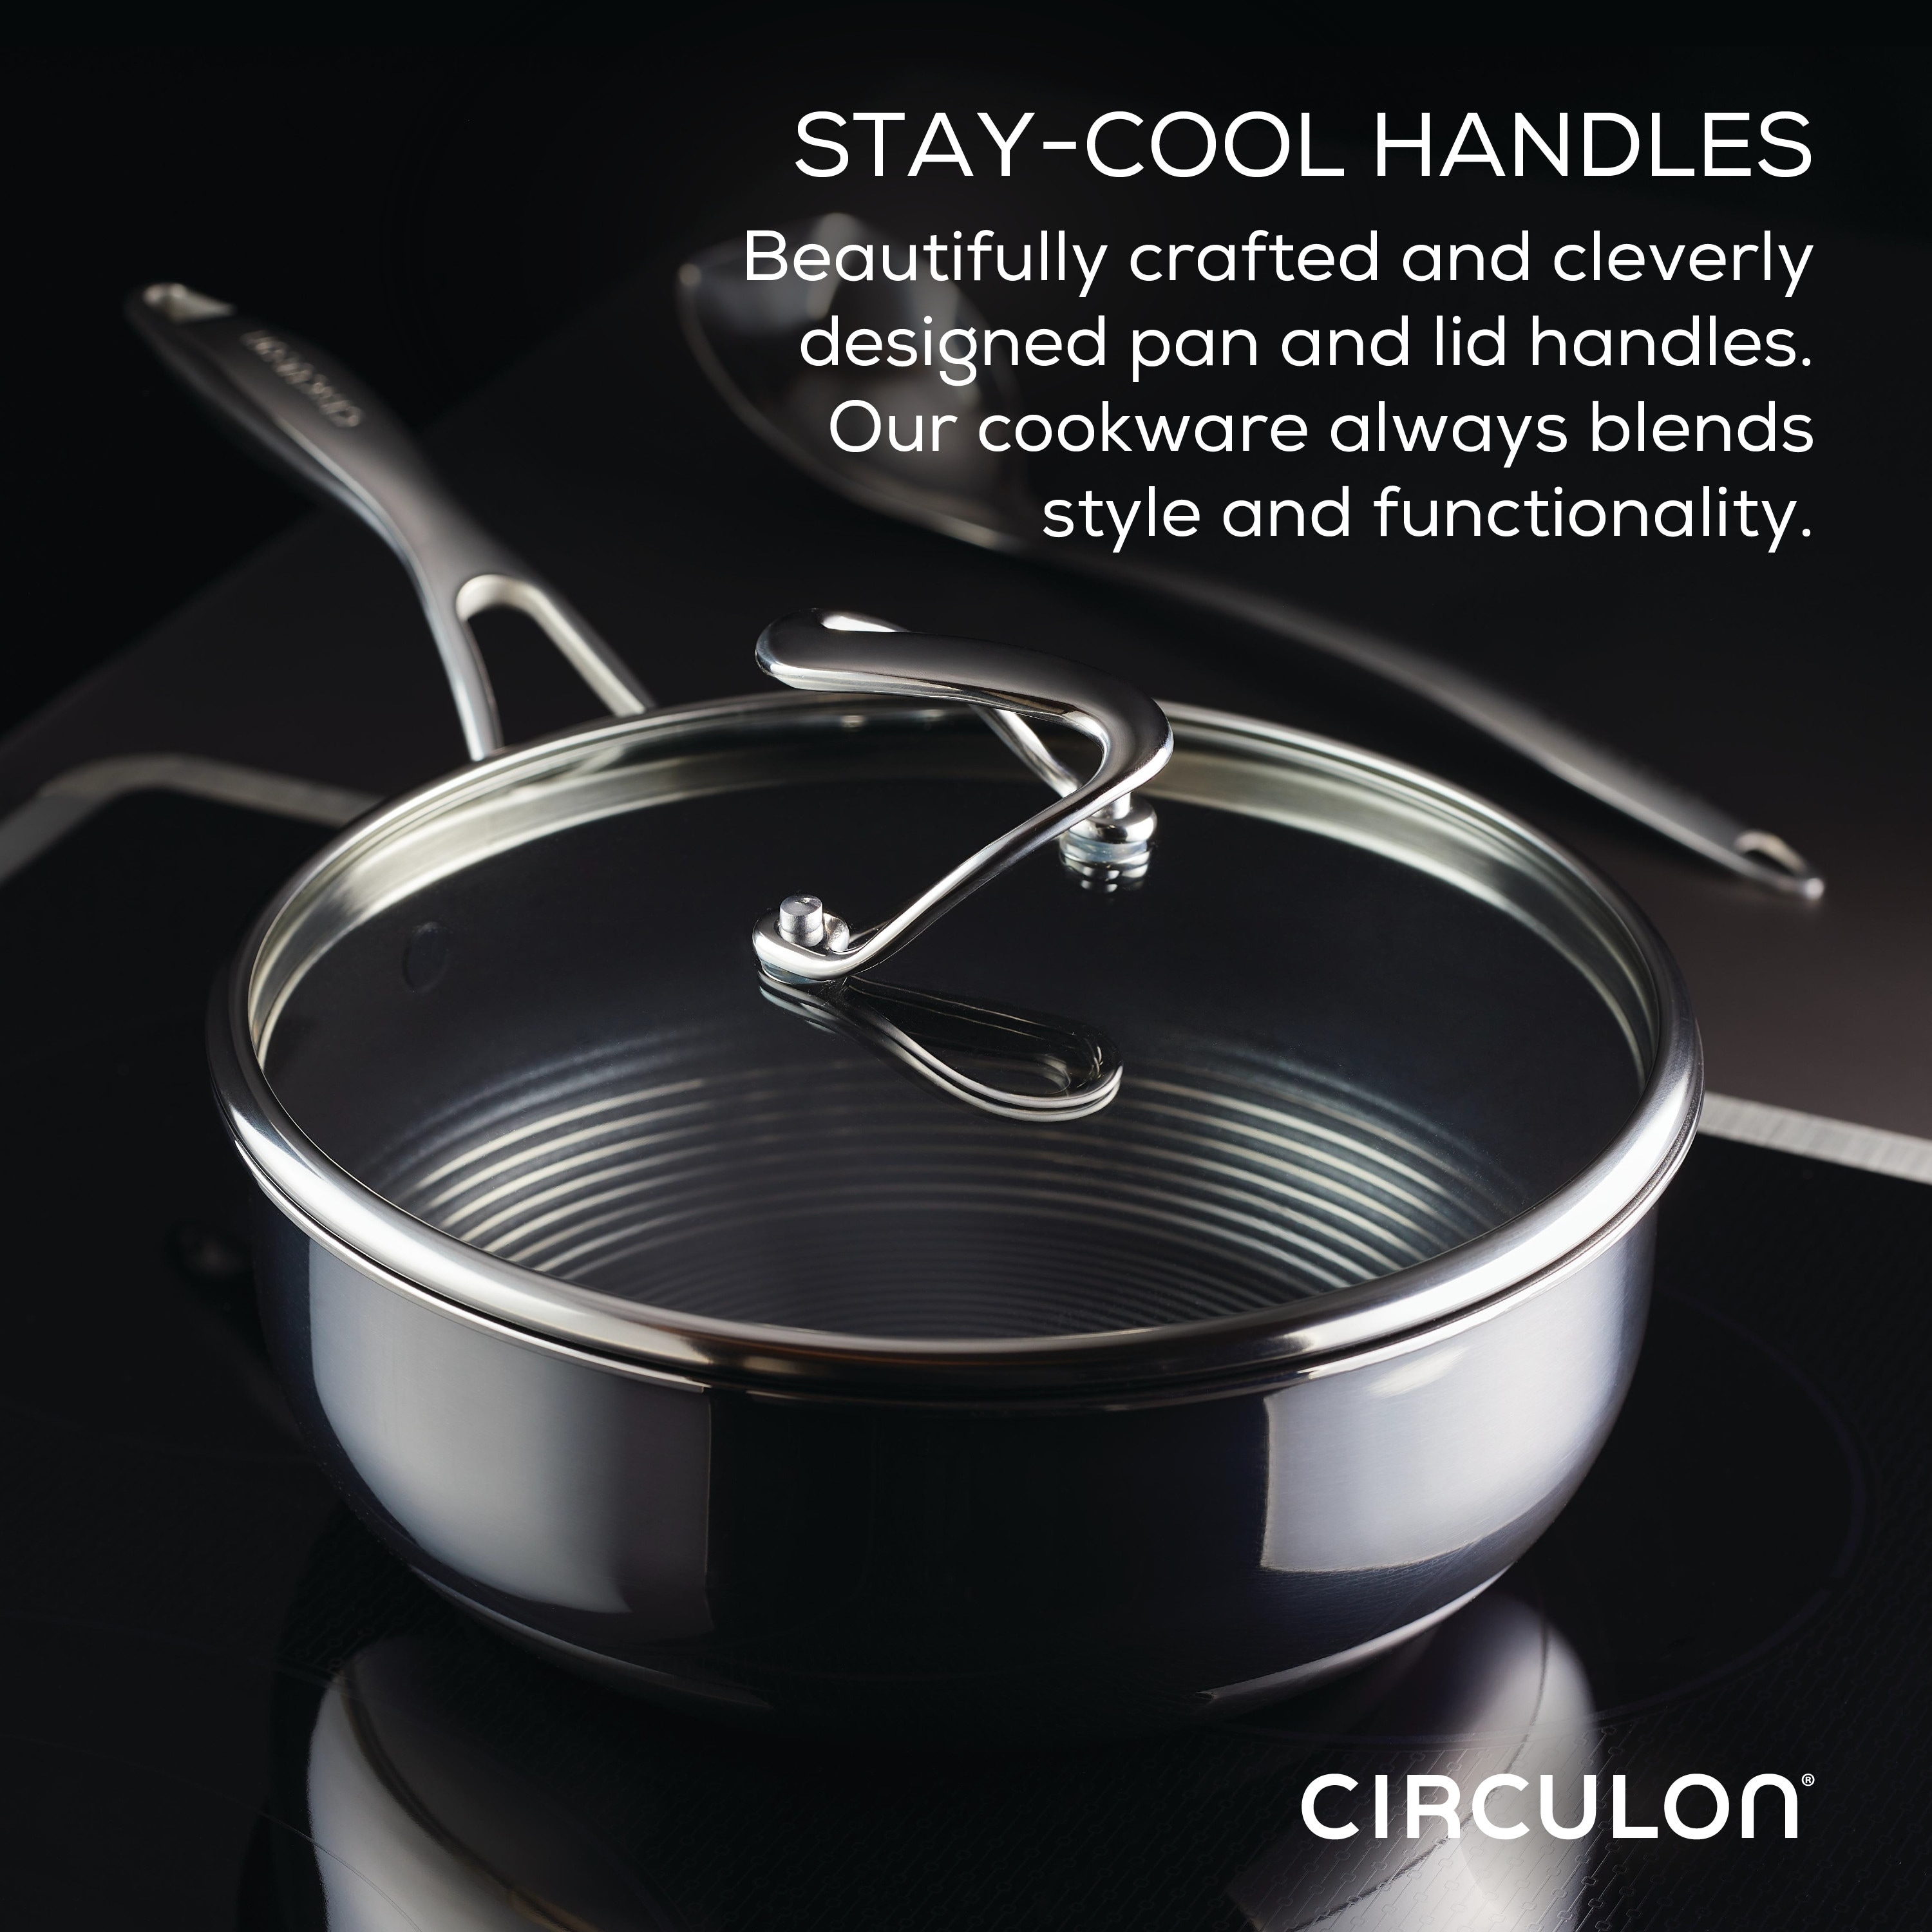 Circulon Clad Stainless Steel Cookware and Utensil Set with Hybrid